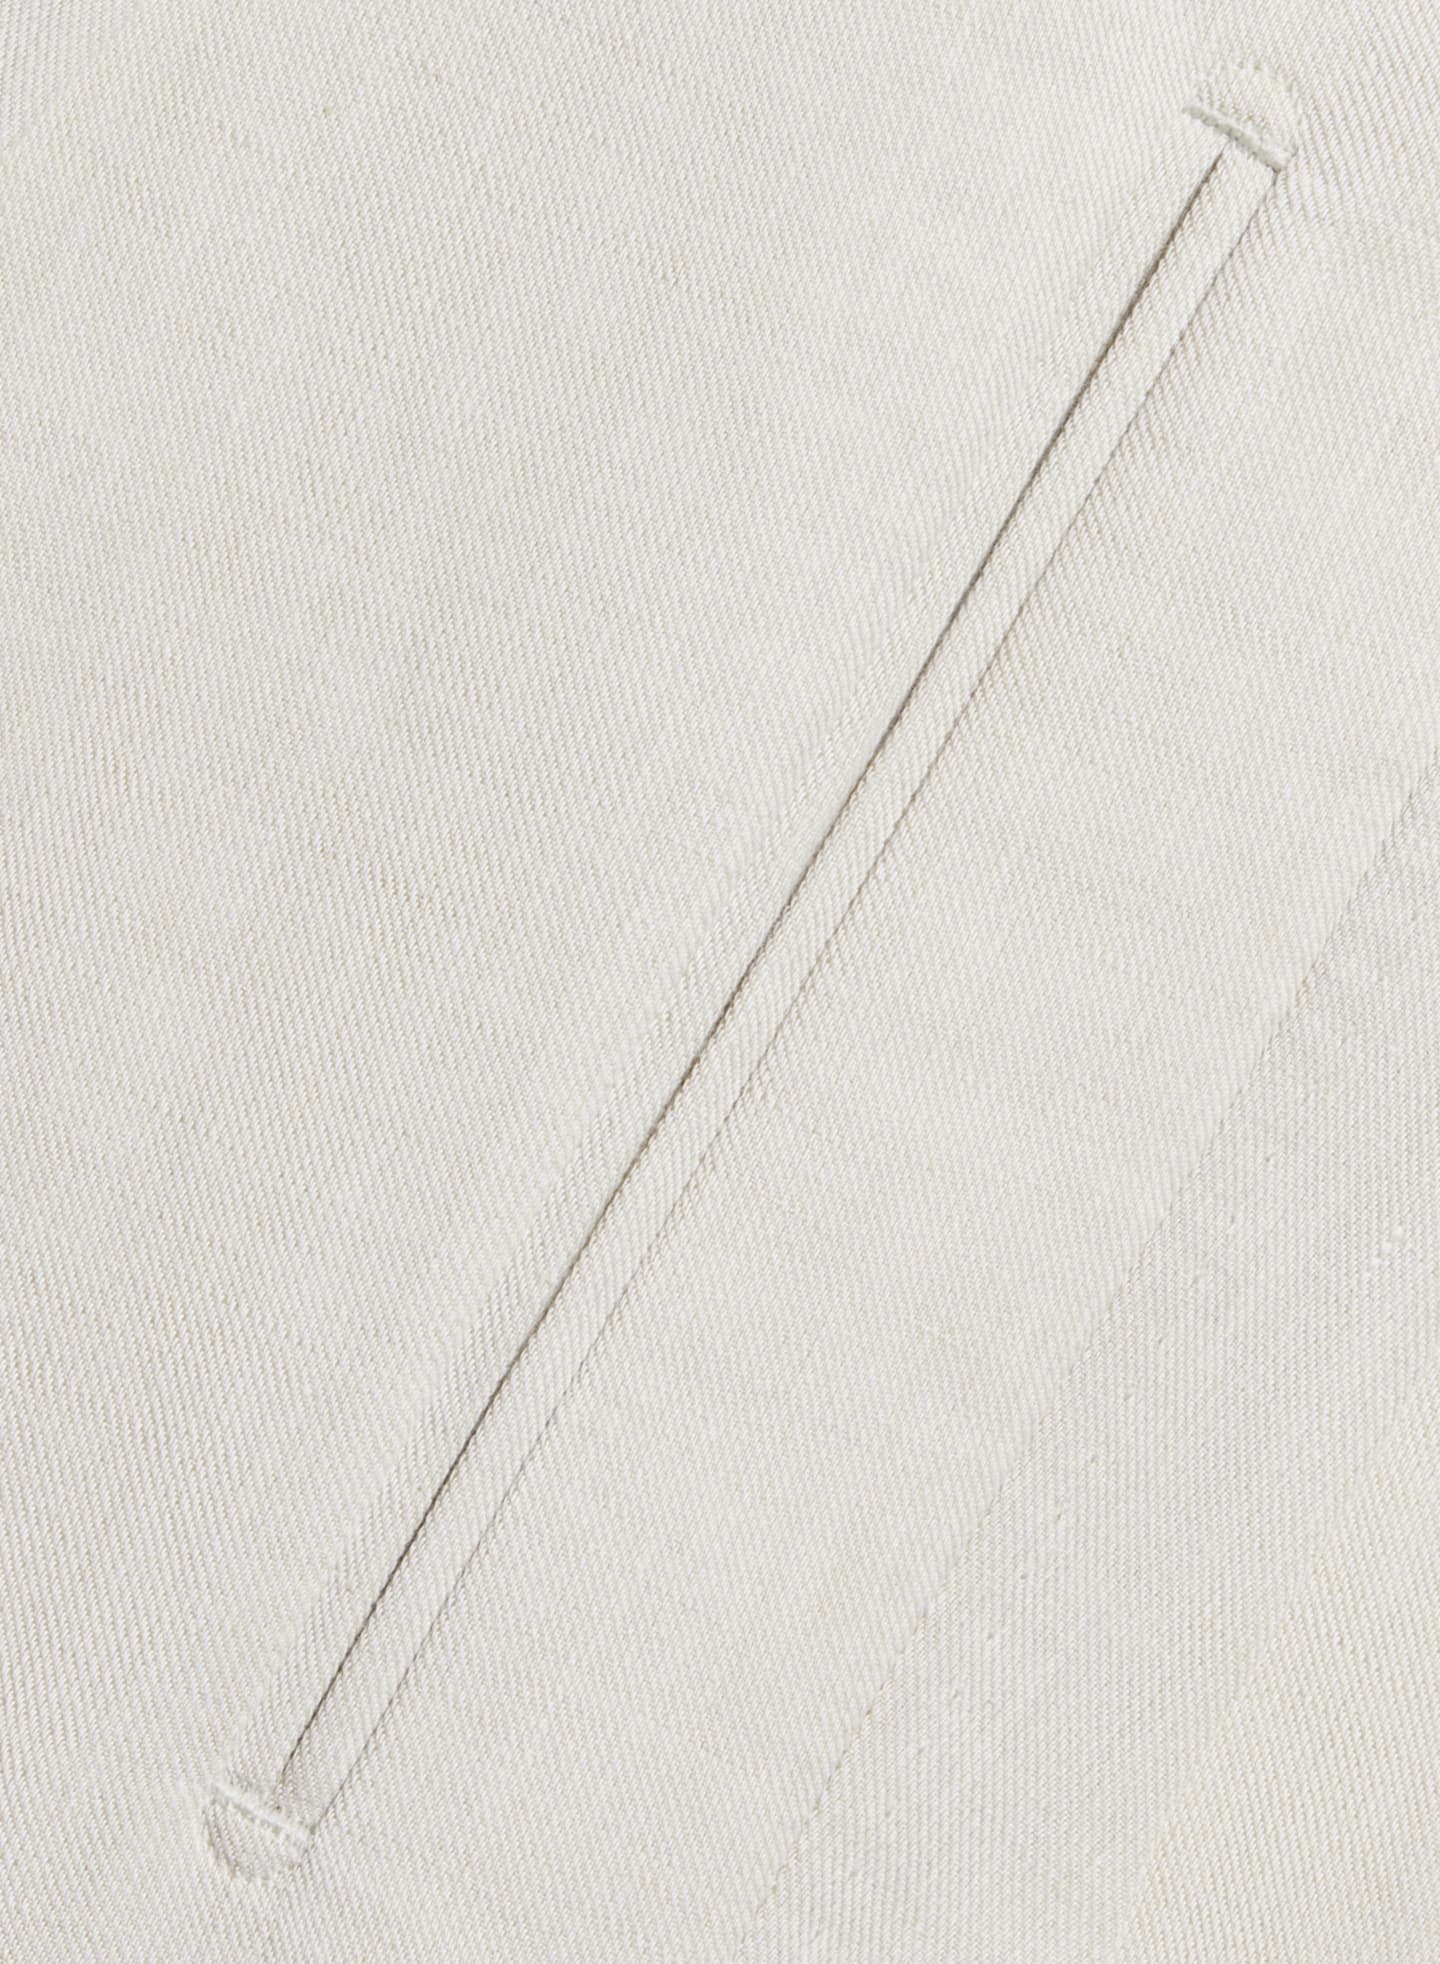 Jetted front pocket, an aesthetic detail on more formal trousers.